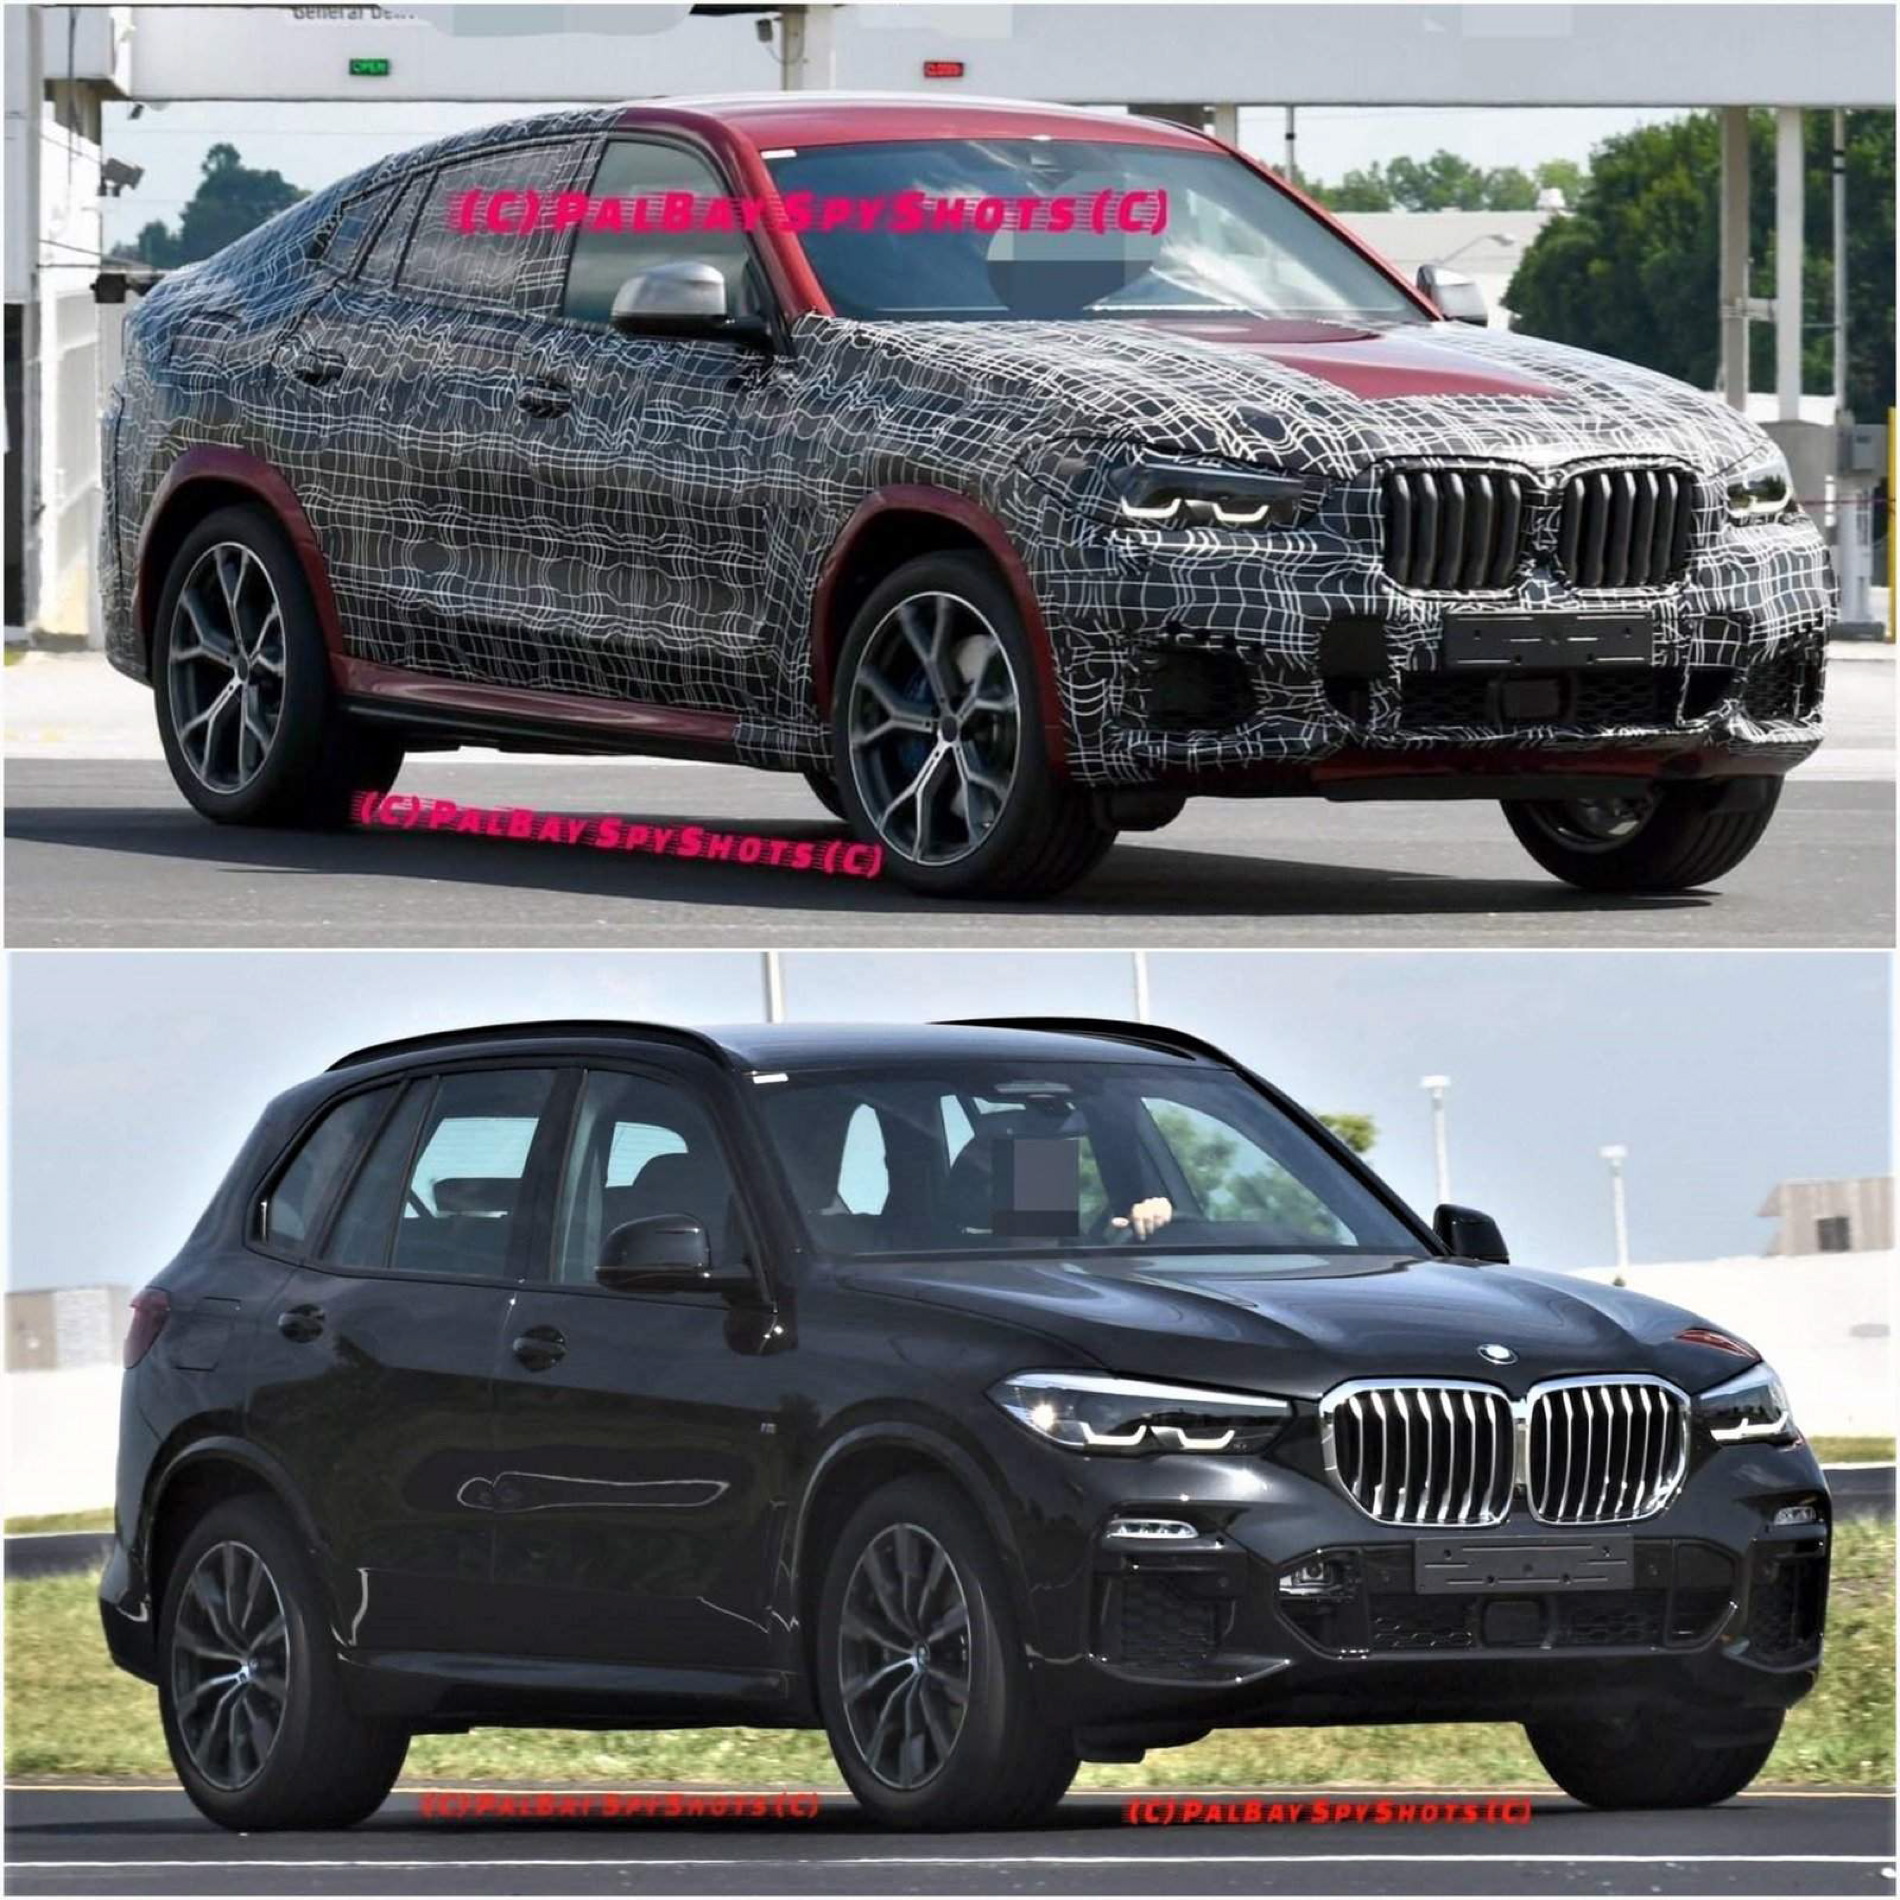 More spy photos of the new BMW G06 X6